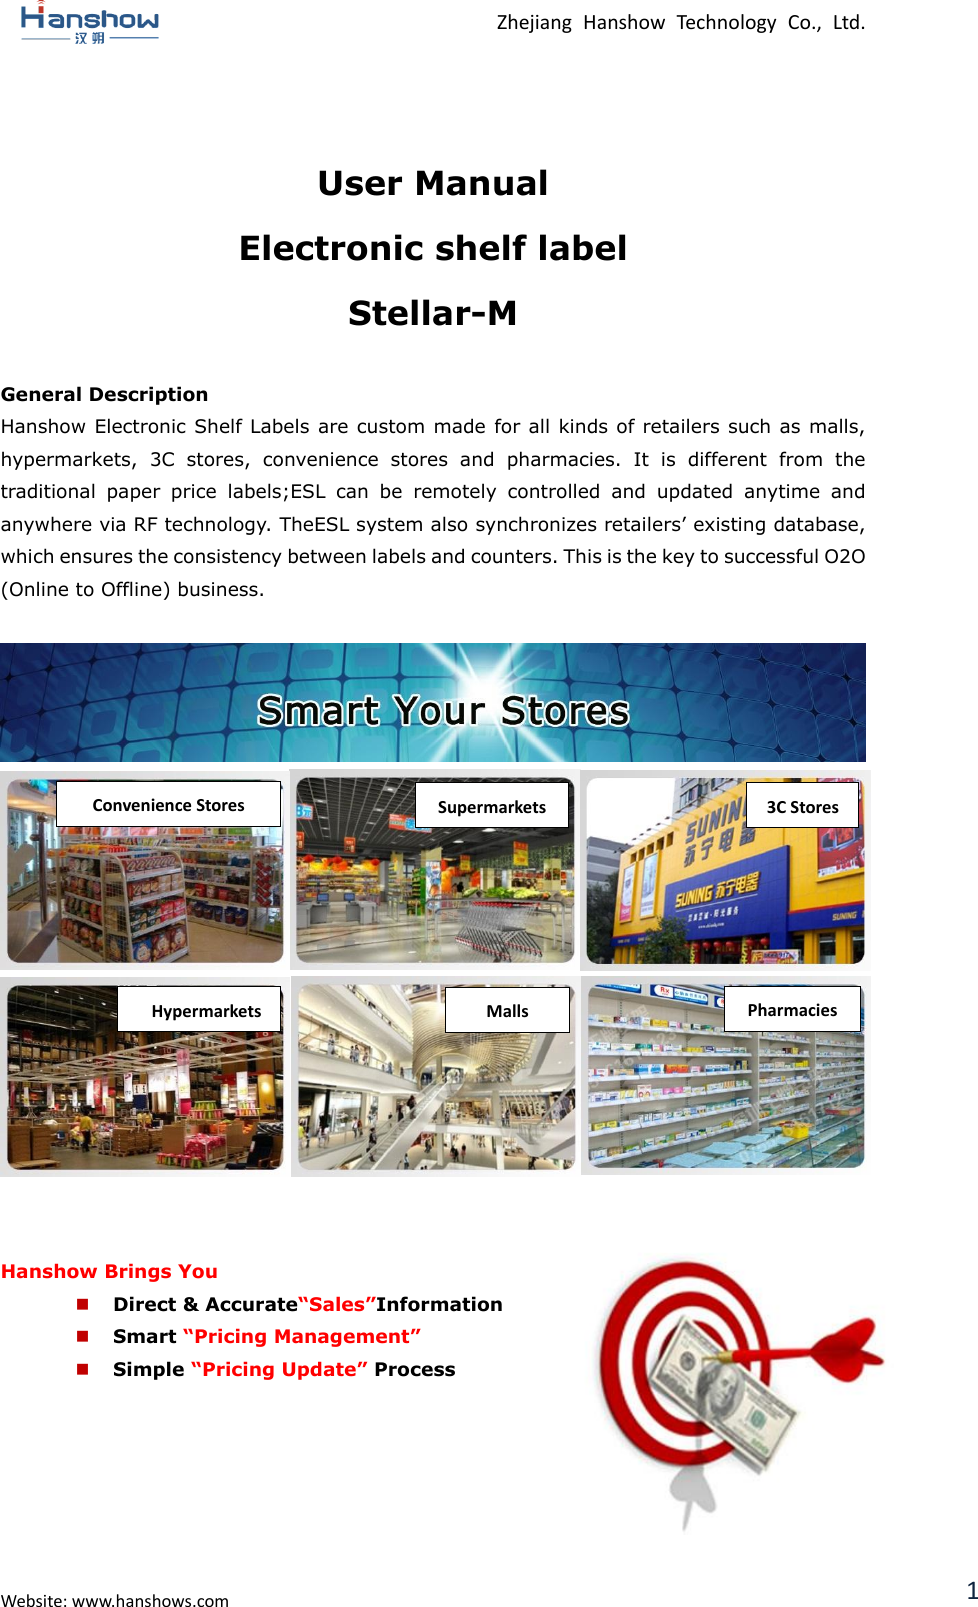  Zhejiang  Hanshow  Technology  Co.,  Ltd.   Website: www.hanshows.com 1  User Manual Electronic shelf label Stellar-M  General Description Hanshow Electronic Shelf Labels are custom made for all kinds of retailers such as malls, hypermarkets,  3C  stores,  convenience  stores  and  pharmacies.  It  is  different  from  the traditional  paper  price  labels;ESL  can  be  remotely  controlled  and  updated  anytime  and anywhere via RF technology. TheESL system also synchronizes retailers’ existing database, which ensures the consistency between labels and counters. This is the key to successful O2O (Online to Offline) business.                    Hanshow Brings You  Direct &amp; Accurate“Sales”Information  Smart “Pricing Management”  Simple “Pricing Update” Process      Convenience Stores Supermarkets 3C Stores Pharmacies Malls Hypermarkets G-MALL 